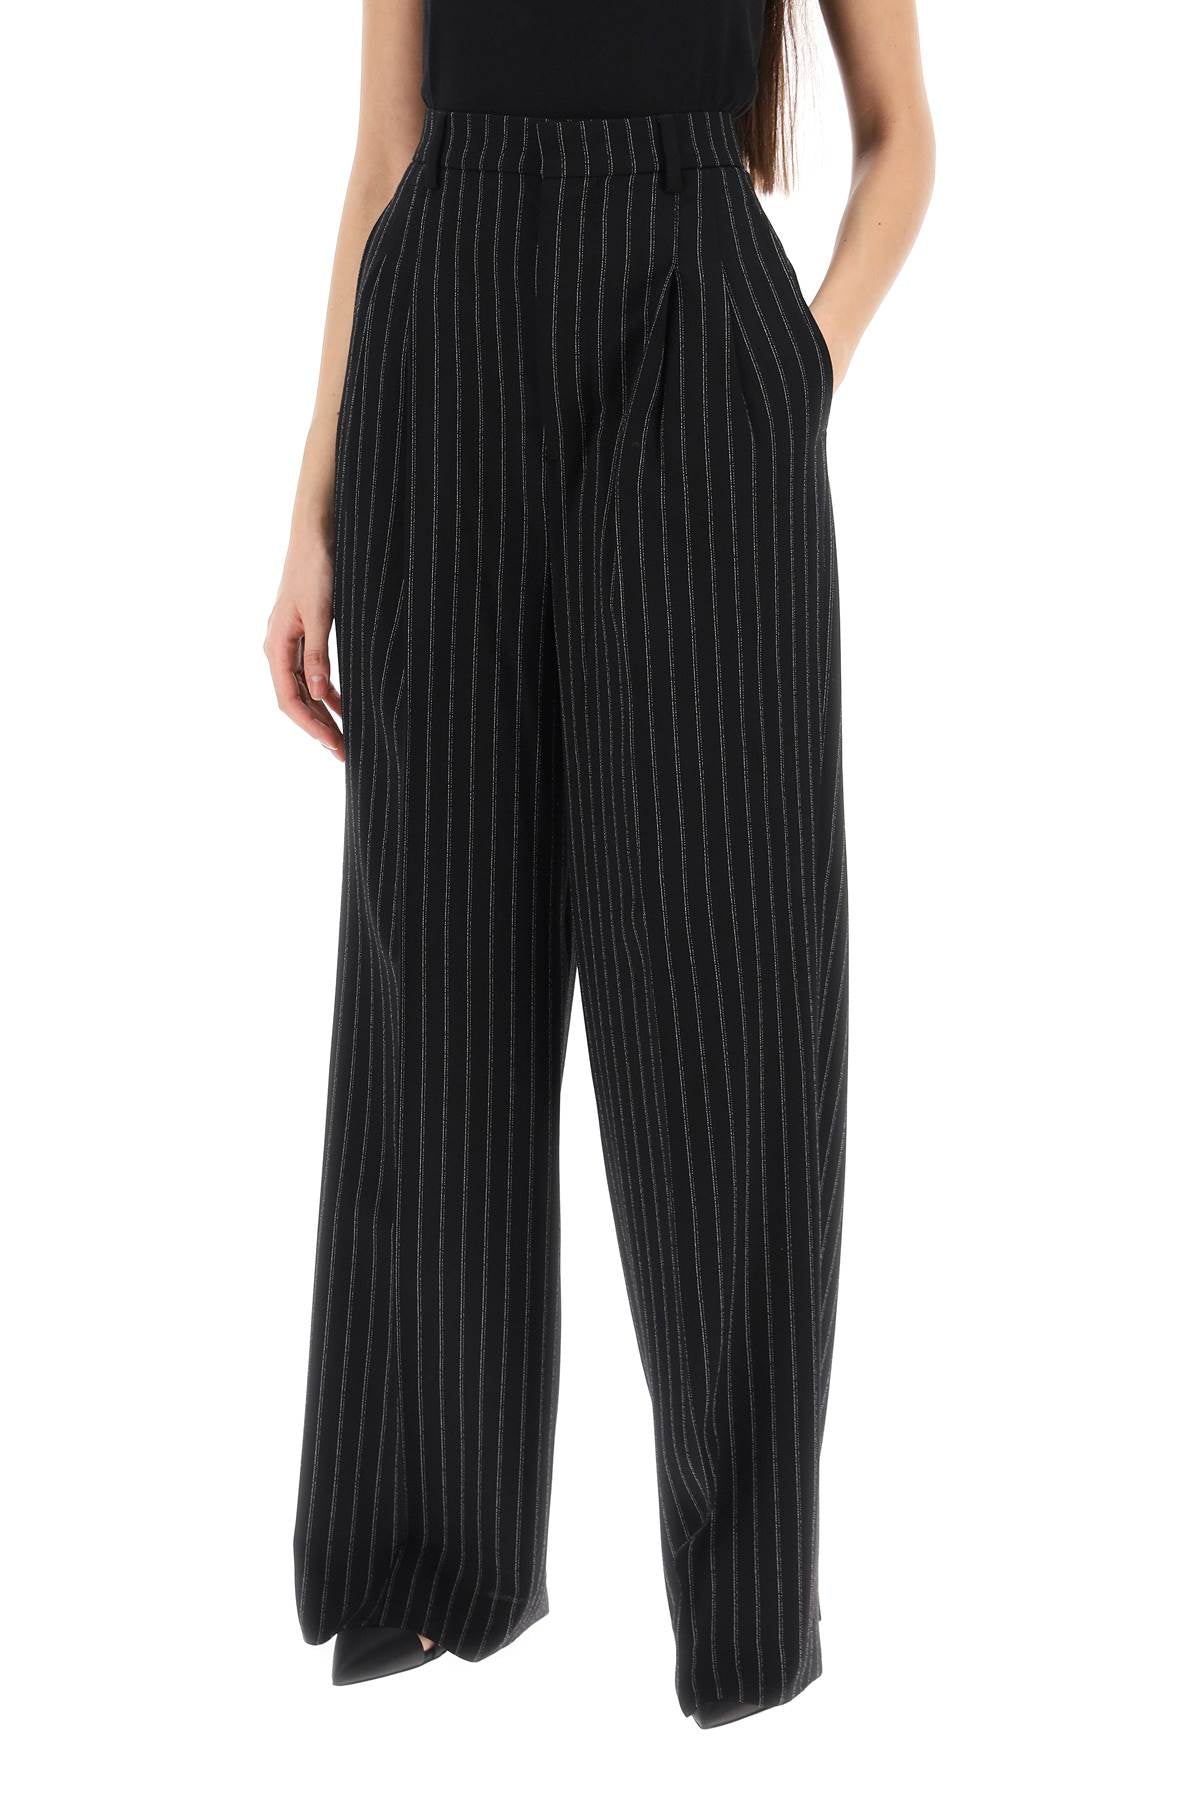 Ami Alexandre Matiussi Wide Legged Pinstripe Trousers With   Black